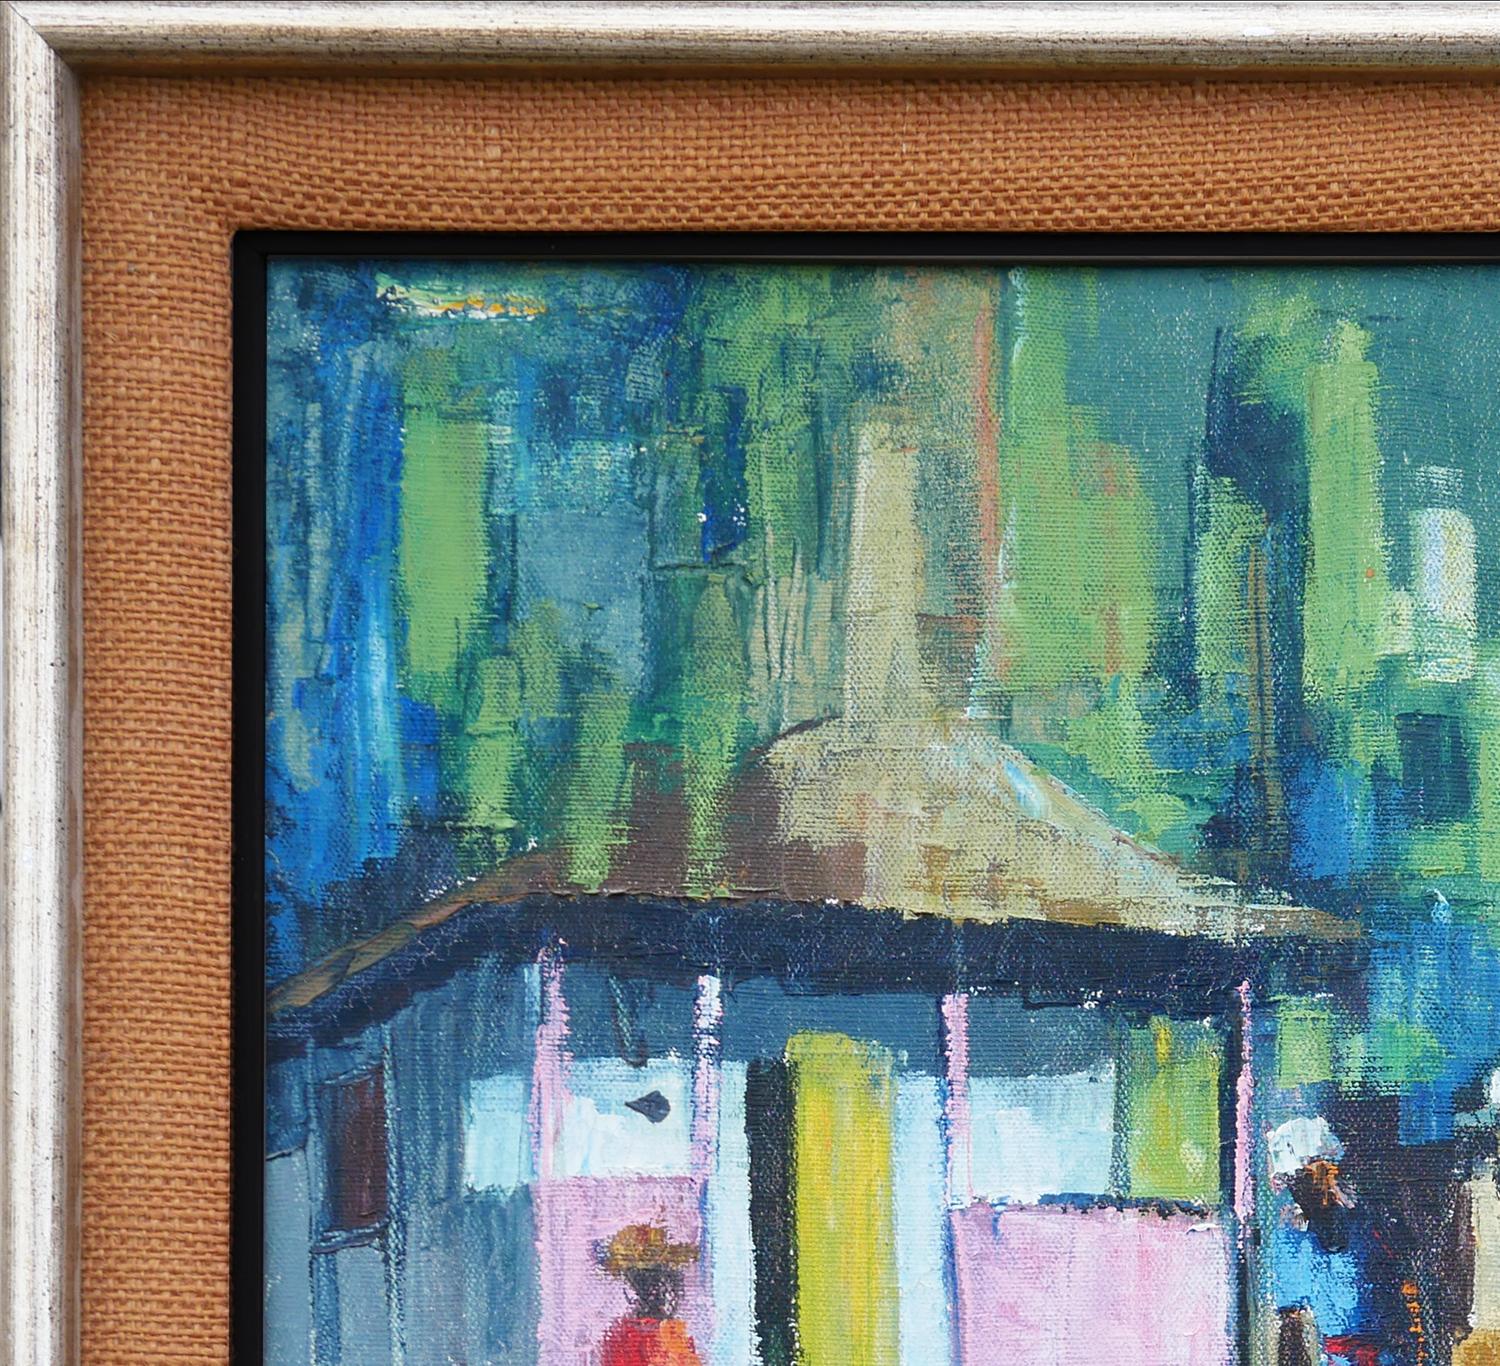 Blue and green toned abstract village landscape by Haitian artist Franklin M. Joseph. The work features loosely rendered figures going about their daily lives. Signed in front lower left corner. Currently hung in a silver and burlap frame.